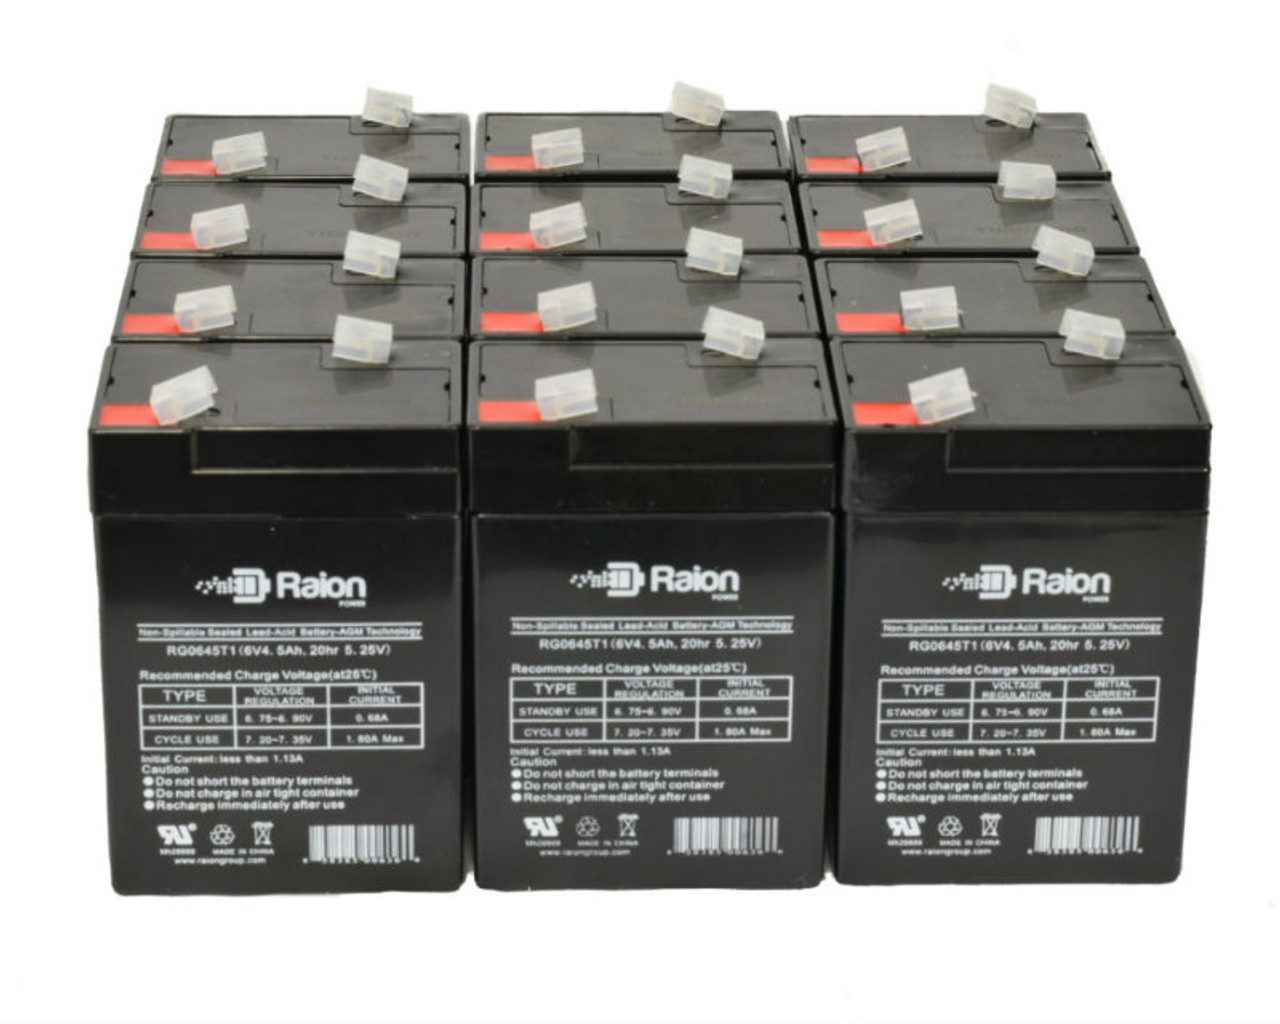 Raion Power 6V 4.5Ah Replacement Emergency Light Battery for Elpower EP640 - 12 Pack